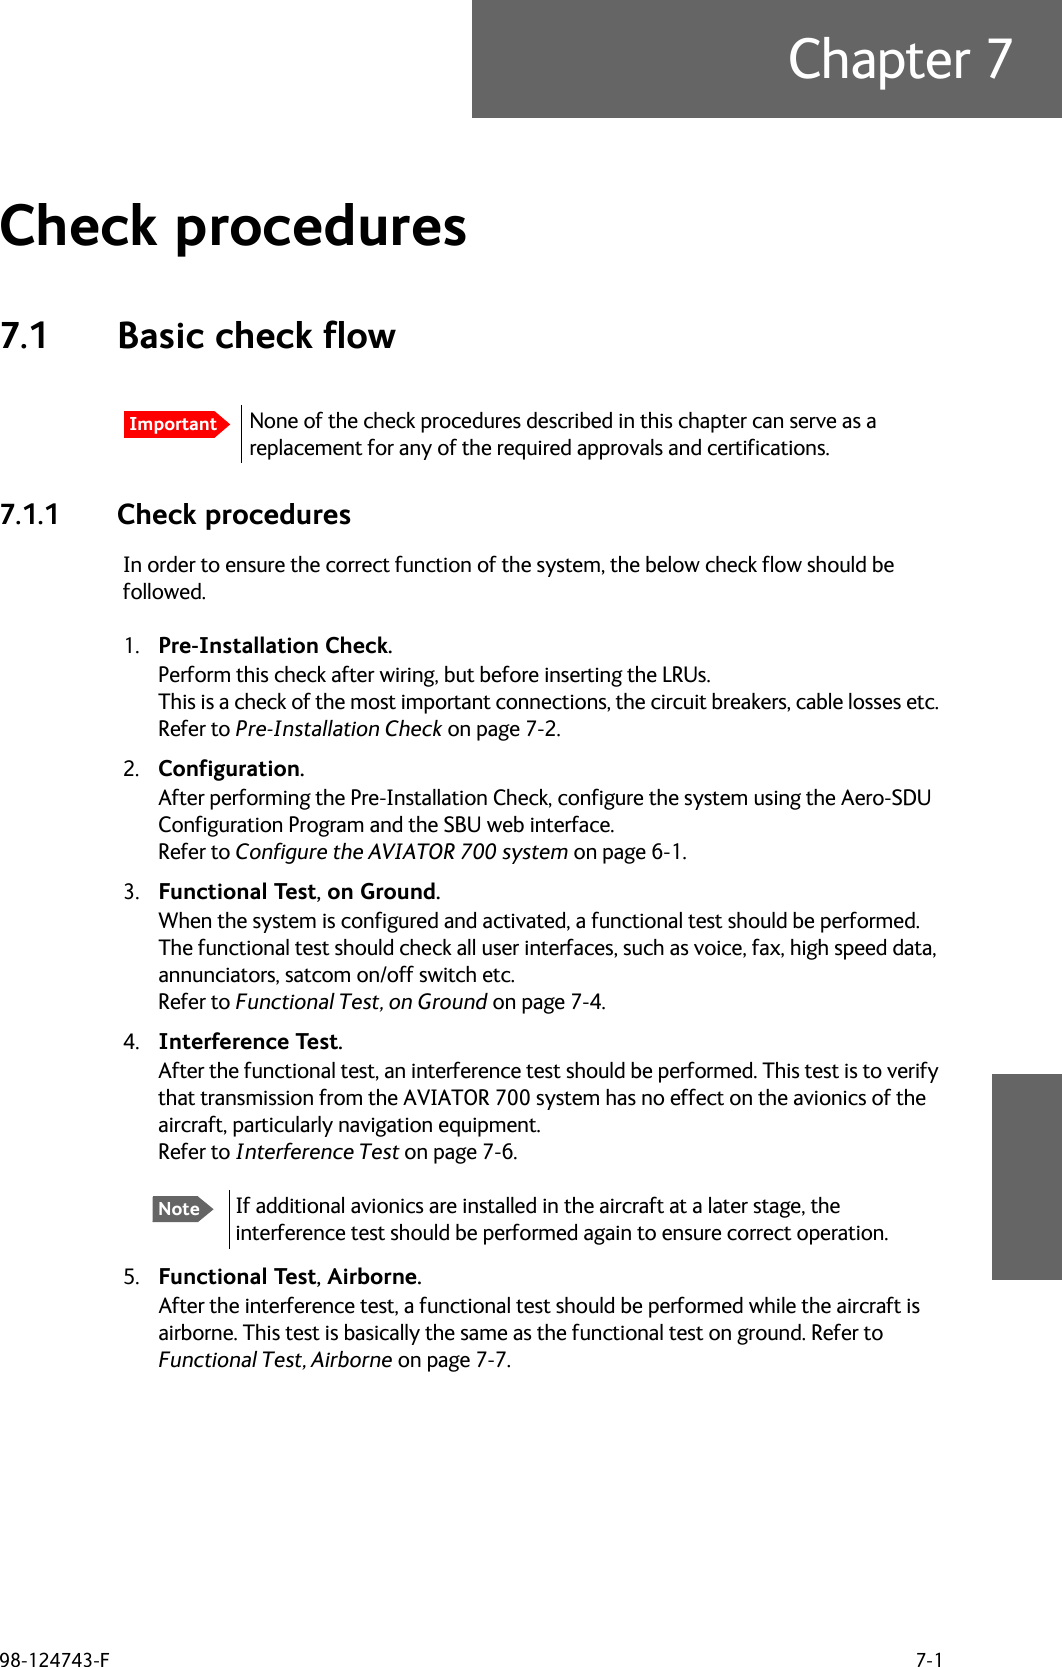 98-124743-F 7-1Chapter 7Check procedures 77.1 Basic check flow7.1.1 Check proceduresIn order to ensure the correct function of the system, the below check flow should be followed.1. Pre-Installation Check.Perform this check after wiring, but before inserting the LRUs. This is a check of the most important connections, the circuit breakers, cable losses etc. Refer to Pre-Installation Check on page 7-2.2. Configuration.After performing the Pre-Installation Check, configure the system using the Aero-SDU Configuration Program and the SBU web interface. Refer to Configure the AVIATOR 700 system on page 6-1.3. Functional Test, on Ground.When the system is configured and activated, a functional test should be performed. The functional test should check all user interfaces, such as voice, fax, high speed data, annunciators, satcom on/off switch etc.Refer to Functional Test, on Ground on page 7-4.4. Interference Test.After the functional test, an interference test should be performed. This test is to verify that transmission from the AVIATOR 700 system has no effect on the avionics of the aircraft, particularly navigation equipment.Refer to Interference Test on page 7-6.5. Functional Test, Airborne.After the interference test, a functional test should be performed while the aircraft is airborne. This test is basically the same as the functional test on ground. Refer to Functional Test, Airborne on page 7-7.ImportantNone of the check procedures described in this chapter can serve as a replacement for any of the required approvals and certifications. NoteIf additional avionics are installed in the aircraft at a later stage, the interference test should be performed again to ensure correct operation.